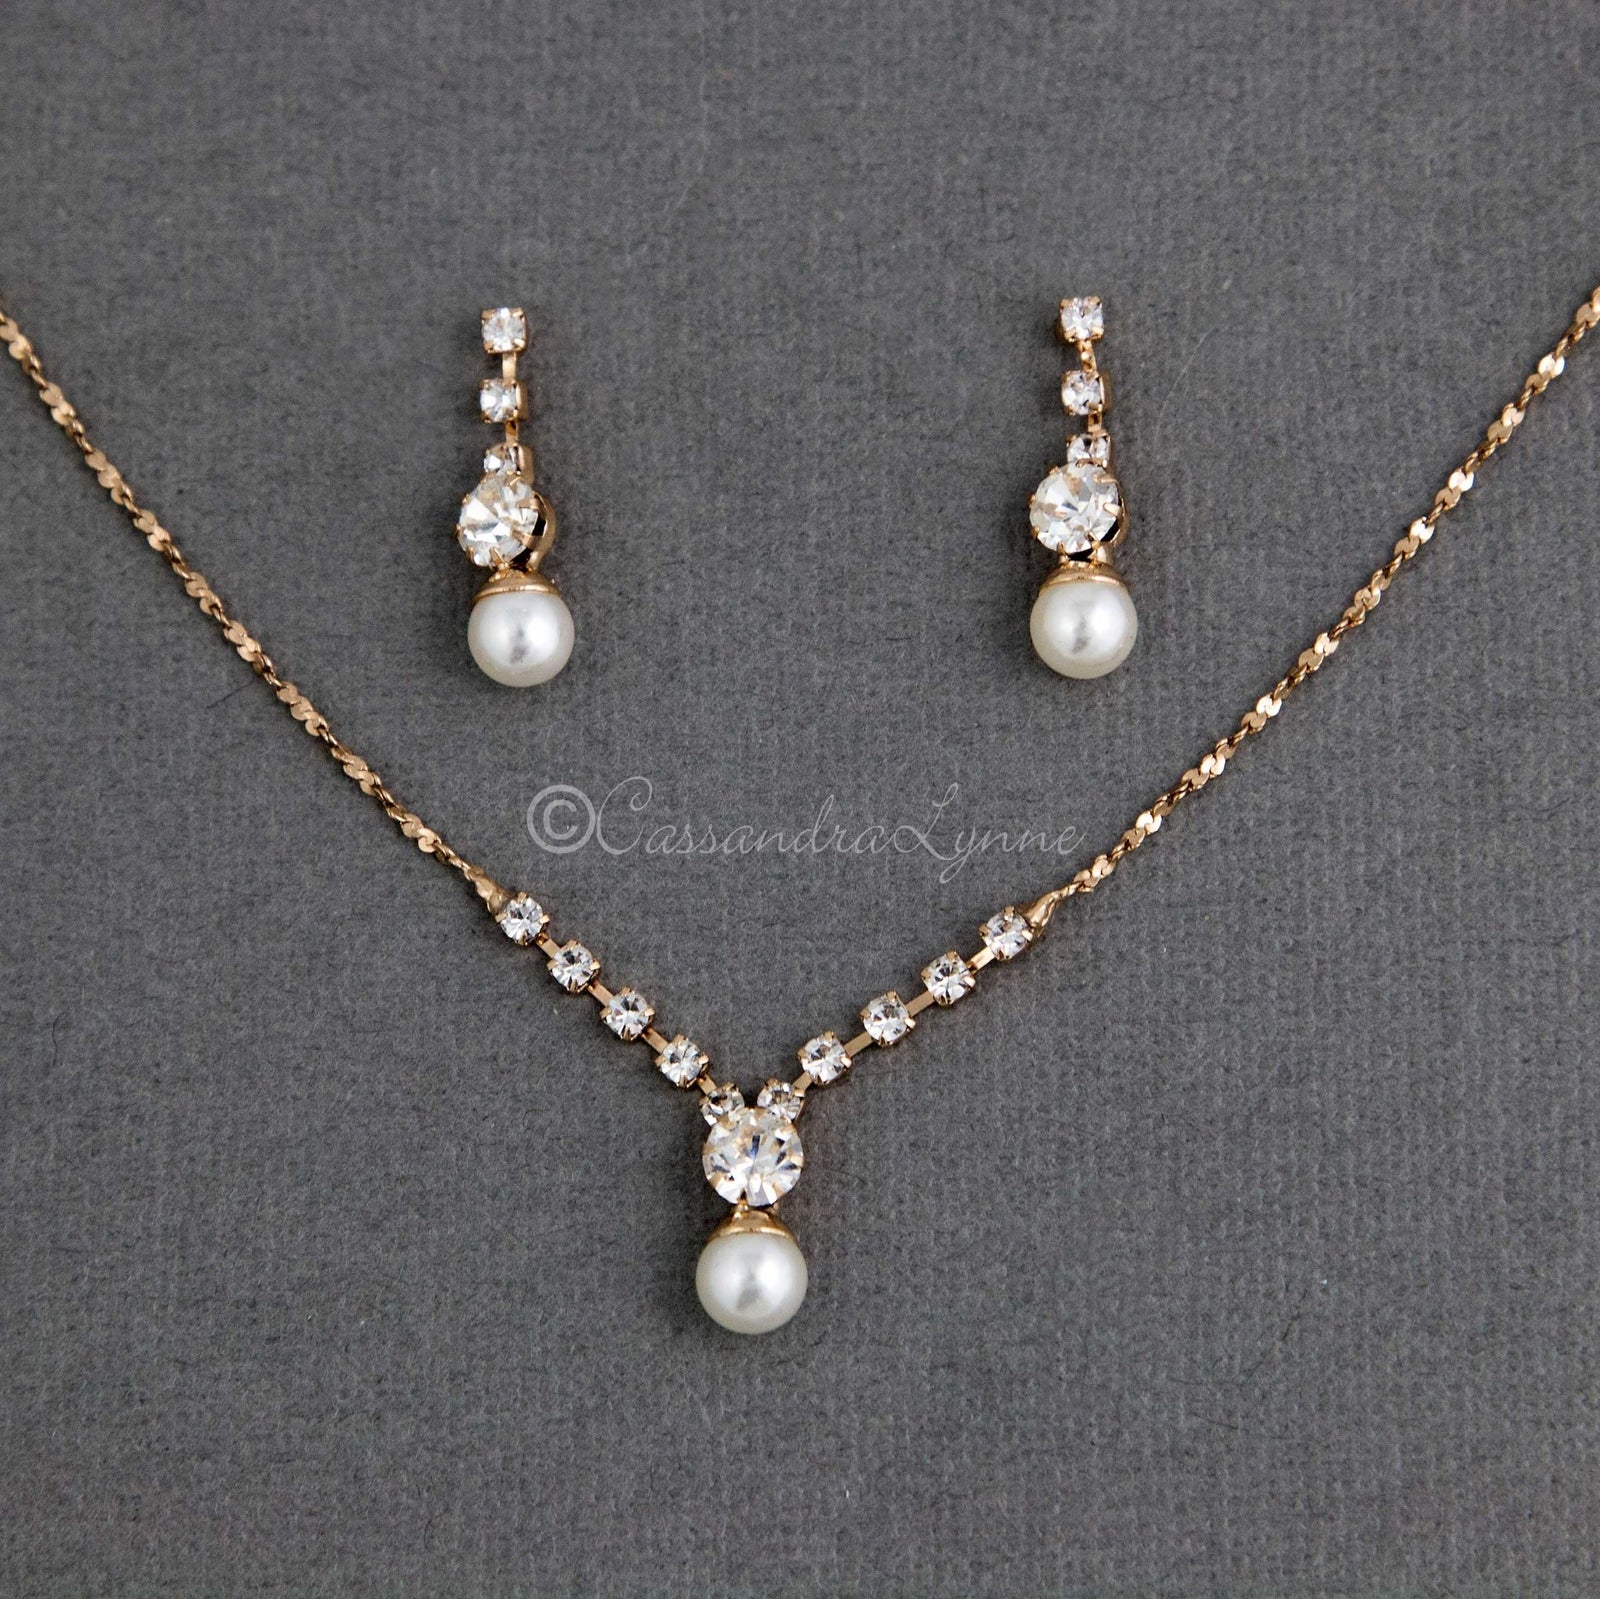 Women's/Girl's Beautiful Gold Crystal And Pearl Necklace Set With